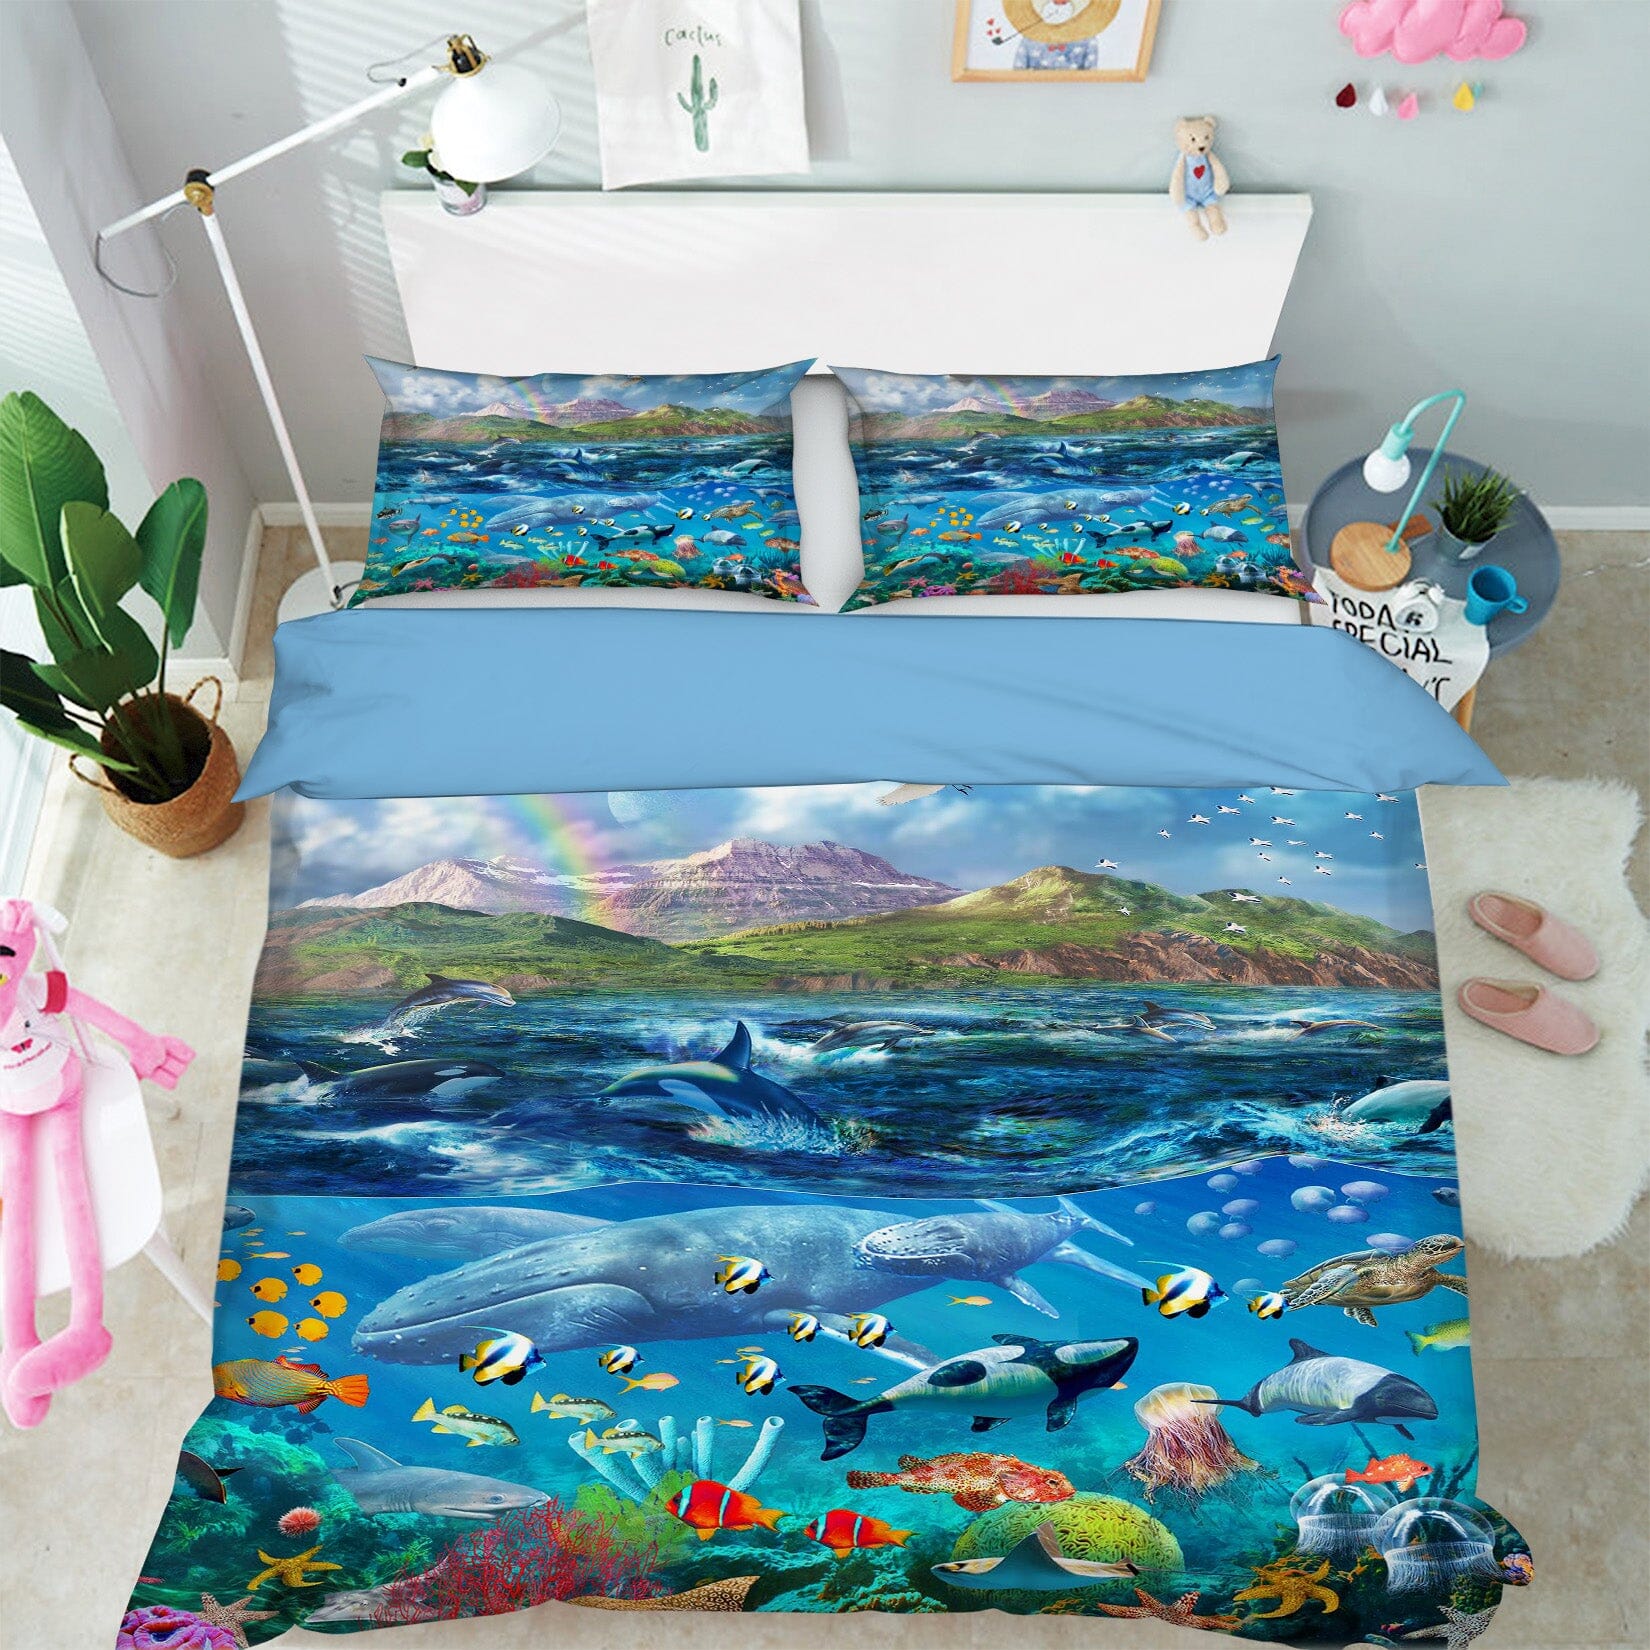 3D The Underwater World 2111 Adrian Chesterman Bedding Bed Pillowcases Quilt Quiet Covers AJ Creativity Home 